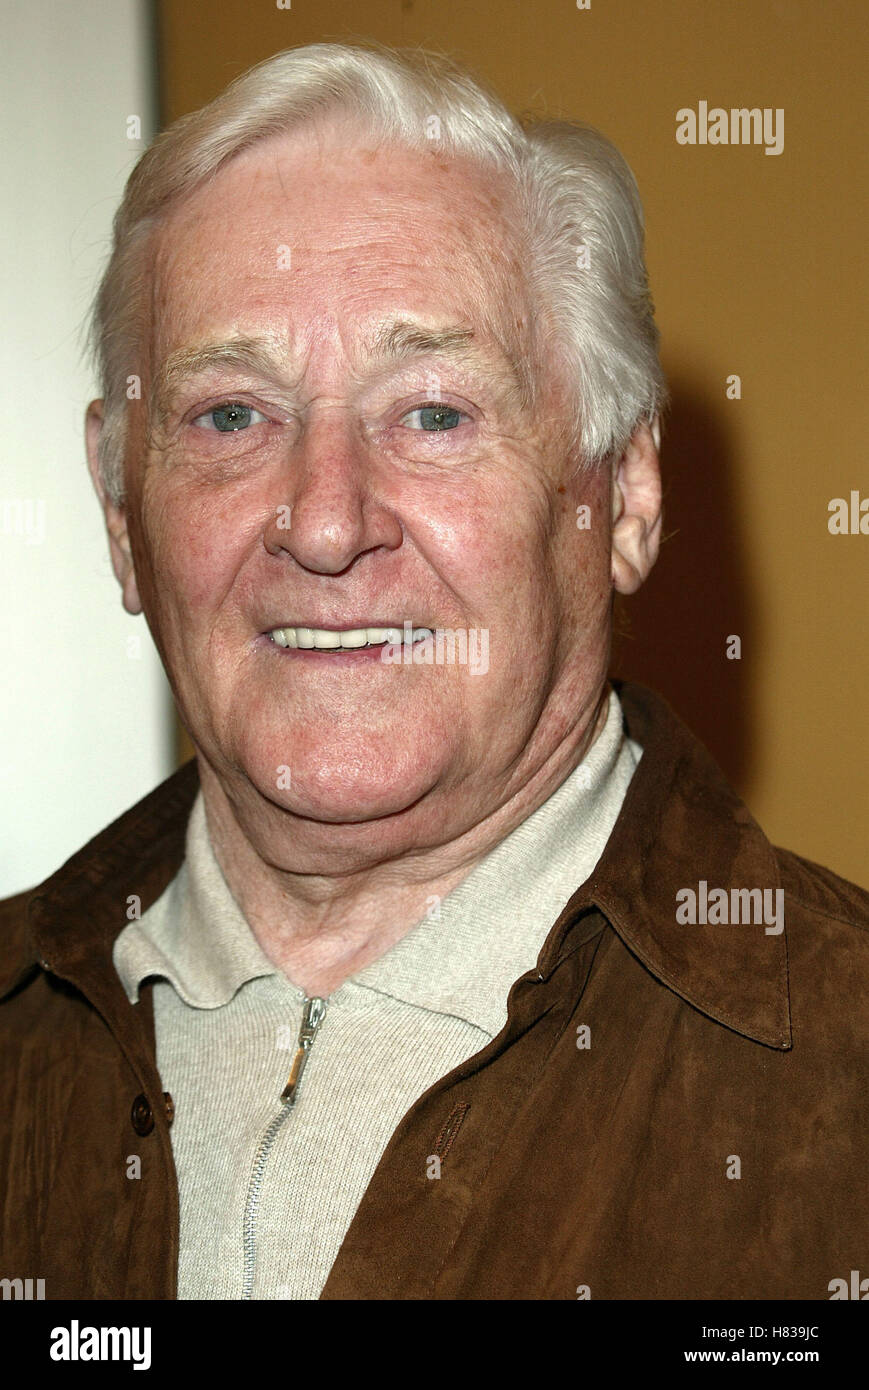 ALAN YOUNG. THE TIME MACHINE FILM PREMIERE WESTWOOD LOS ANGELES USA 04 March 2002 Stock Photo